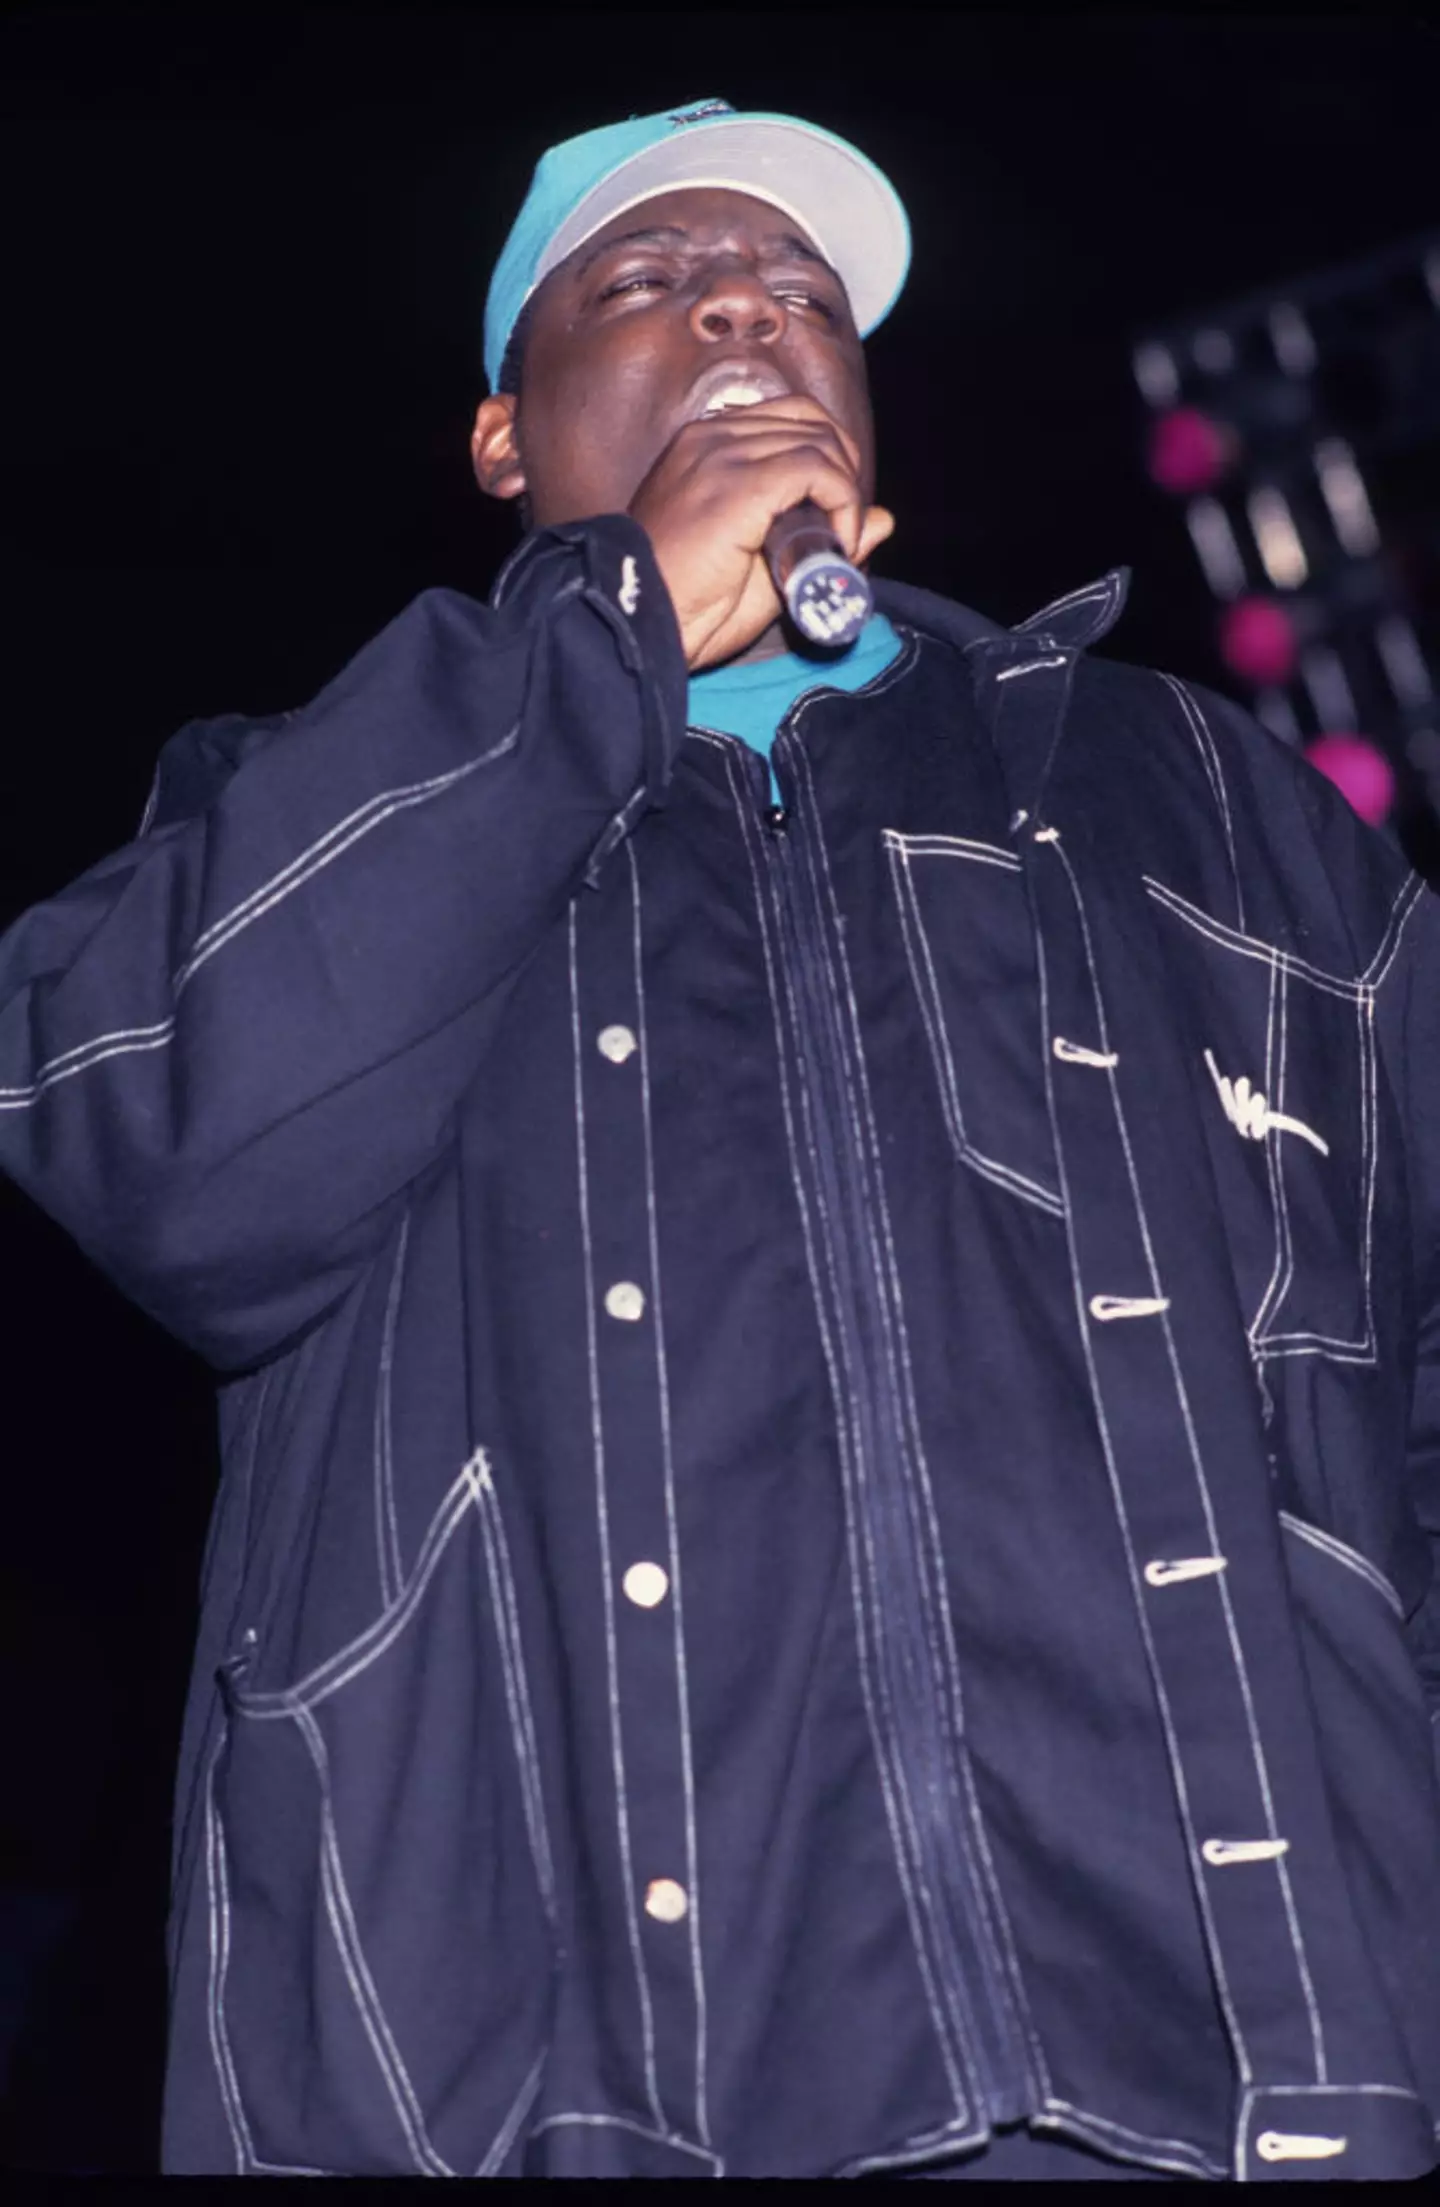 Biggie was killed in drive-by just a year later, in 1997.